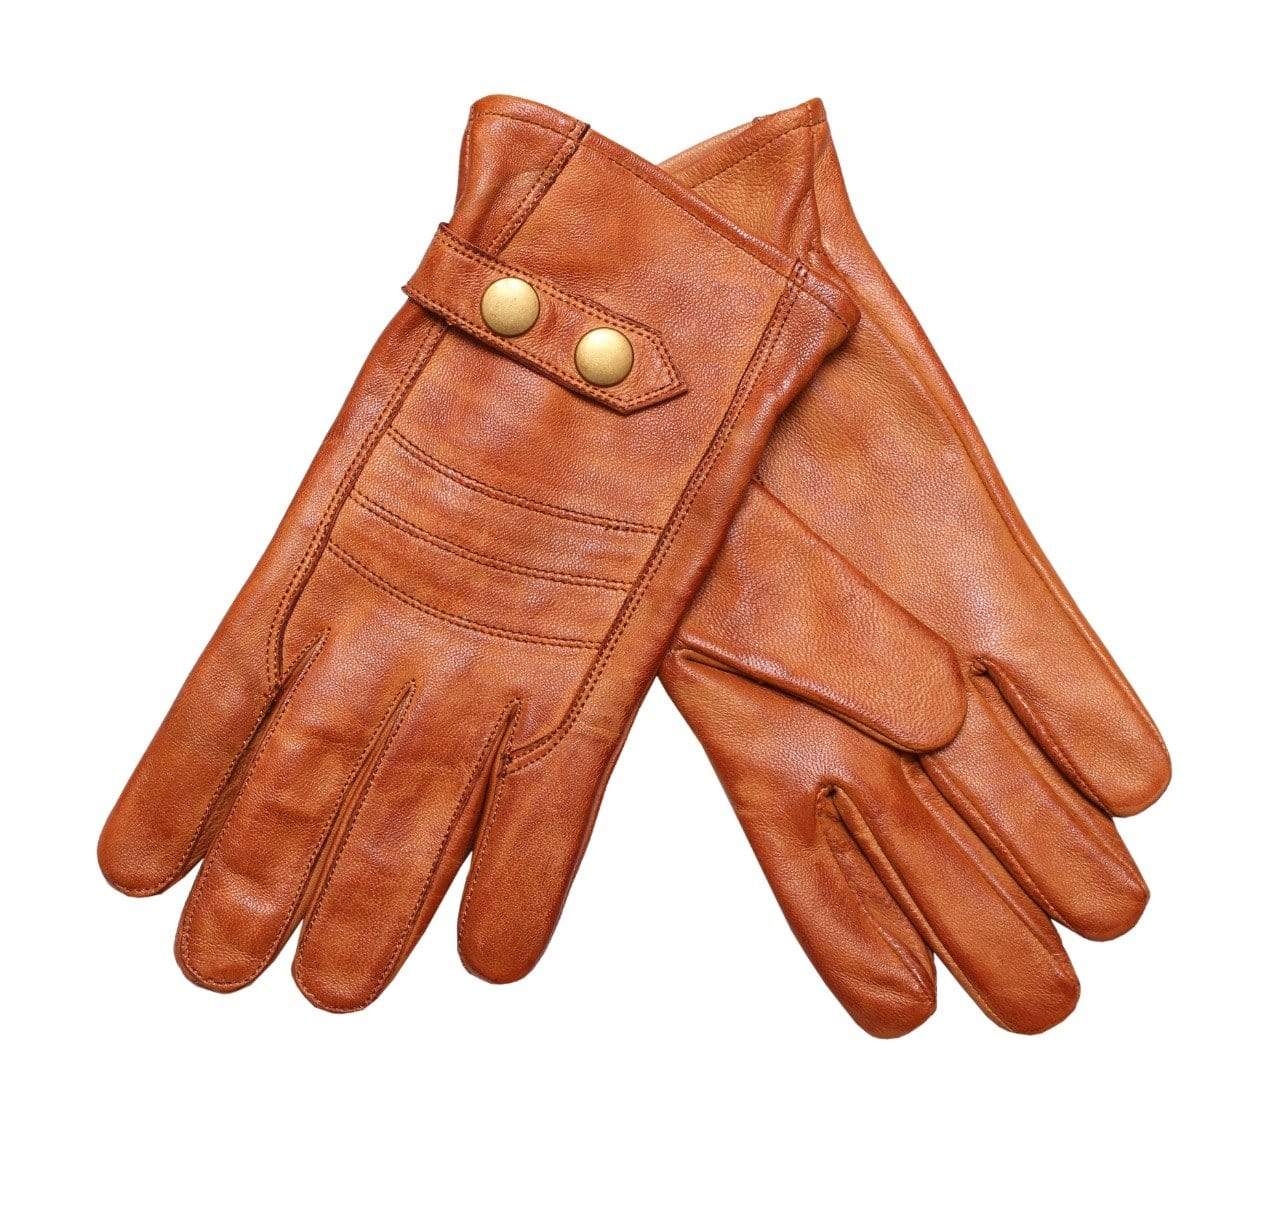 Indepal Leather Gloves Tan / Small GLOVE - Bergman 2-Clip